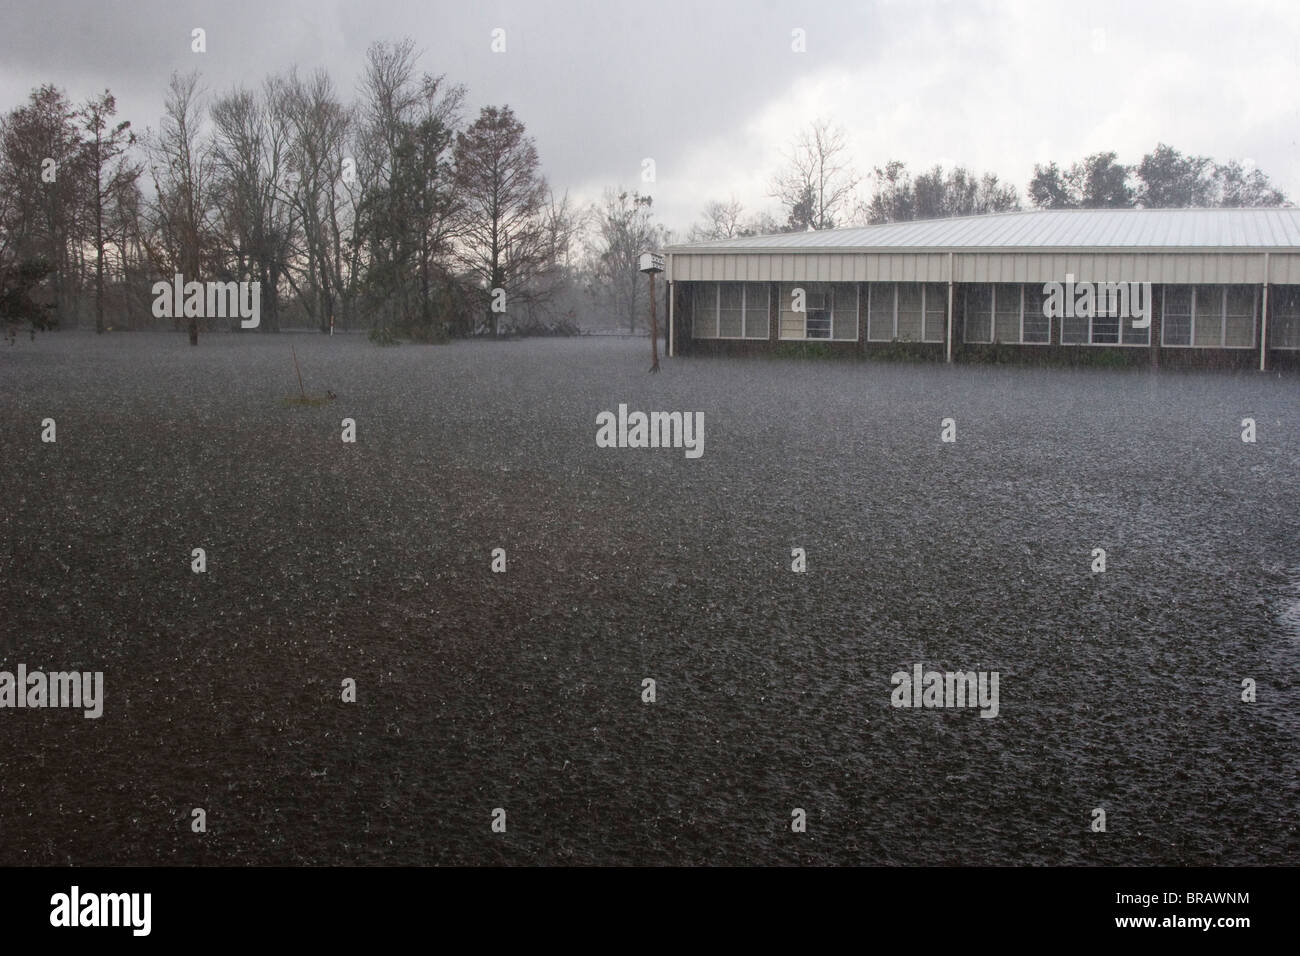 The elementary school in endangered Pointe aux Chene, Louisiana is flooded after Hurricane Ike. Stock Photo